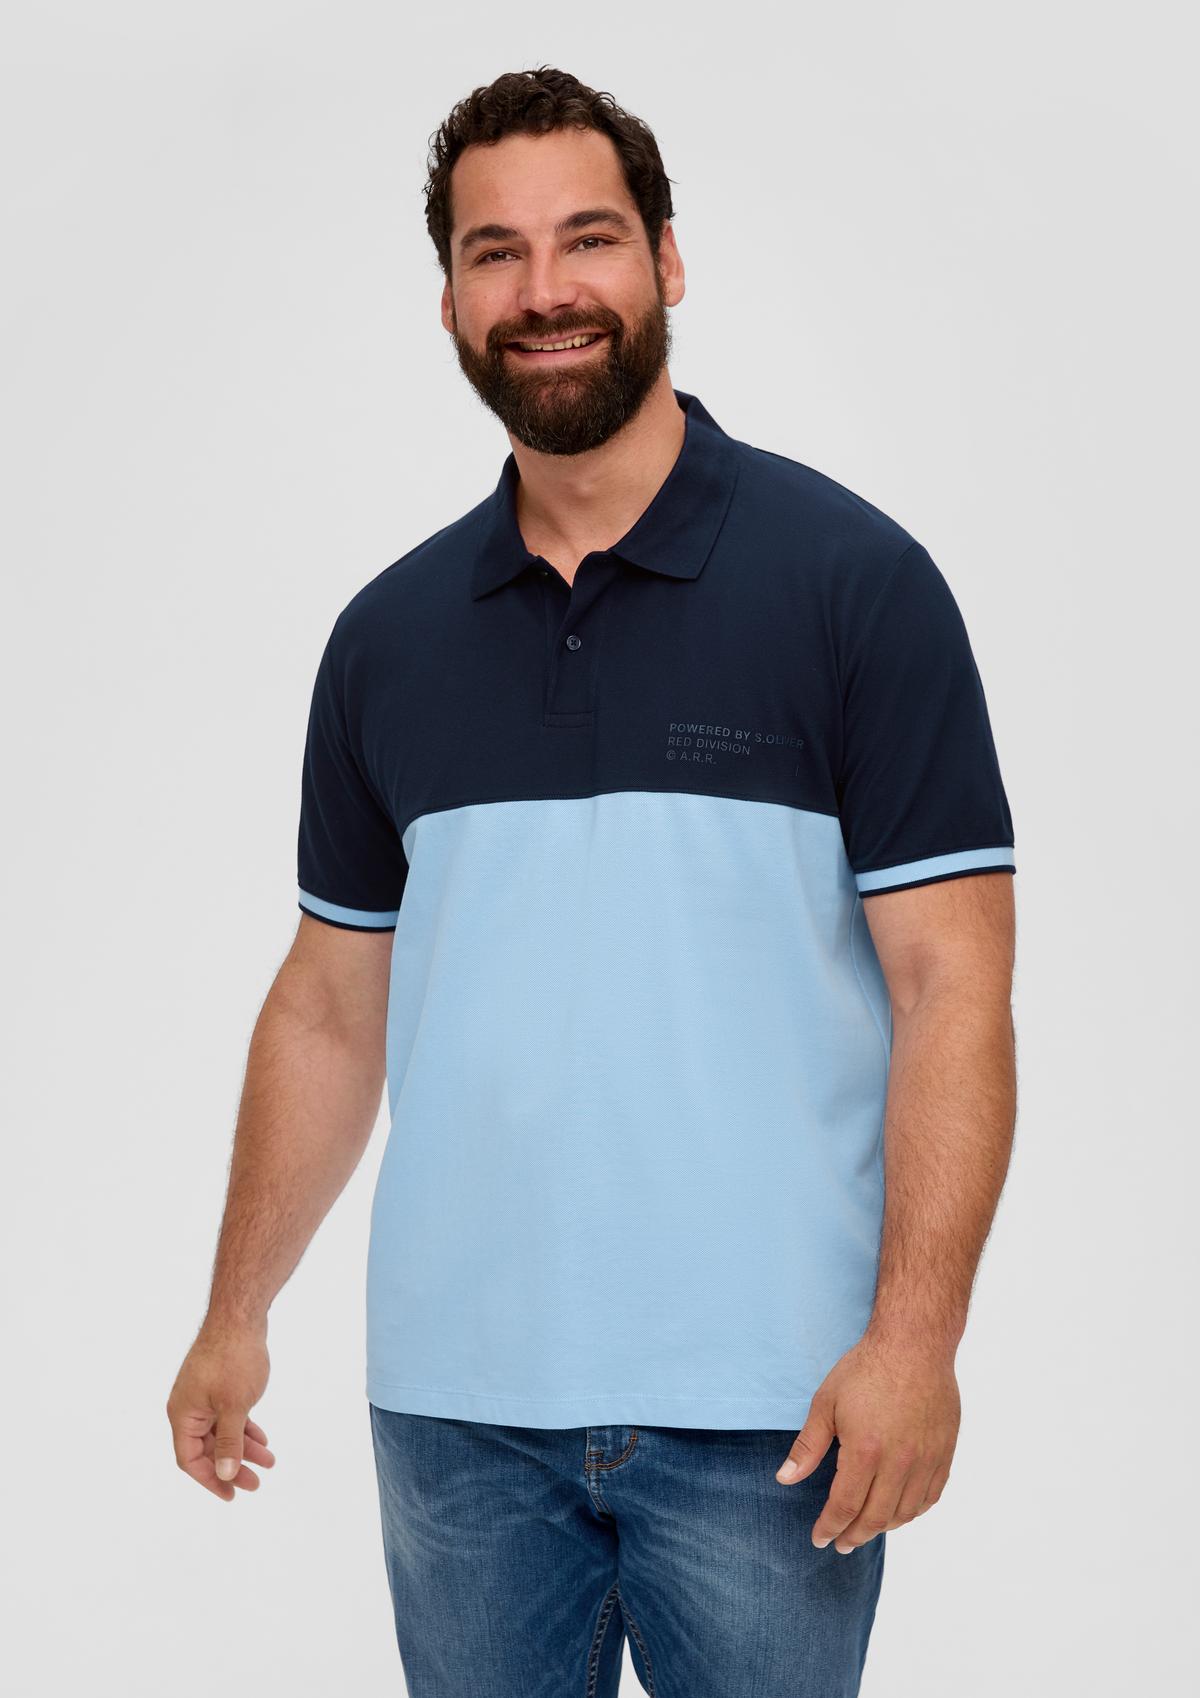 Polo Men Shirts for